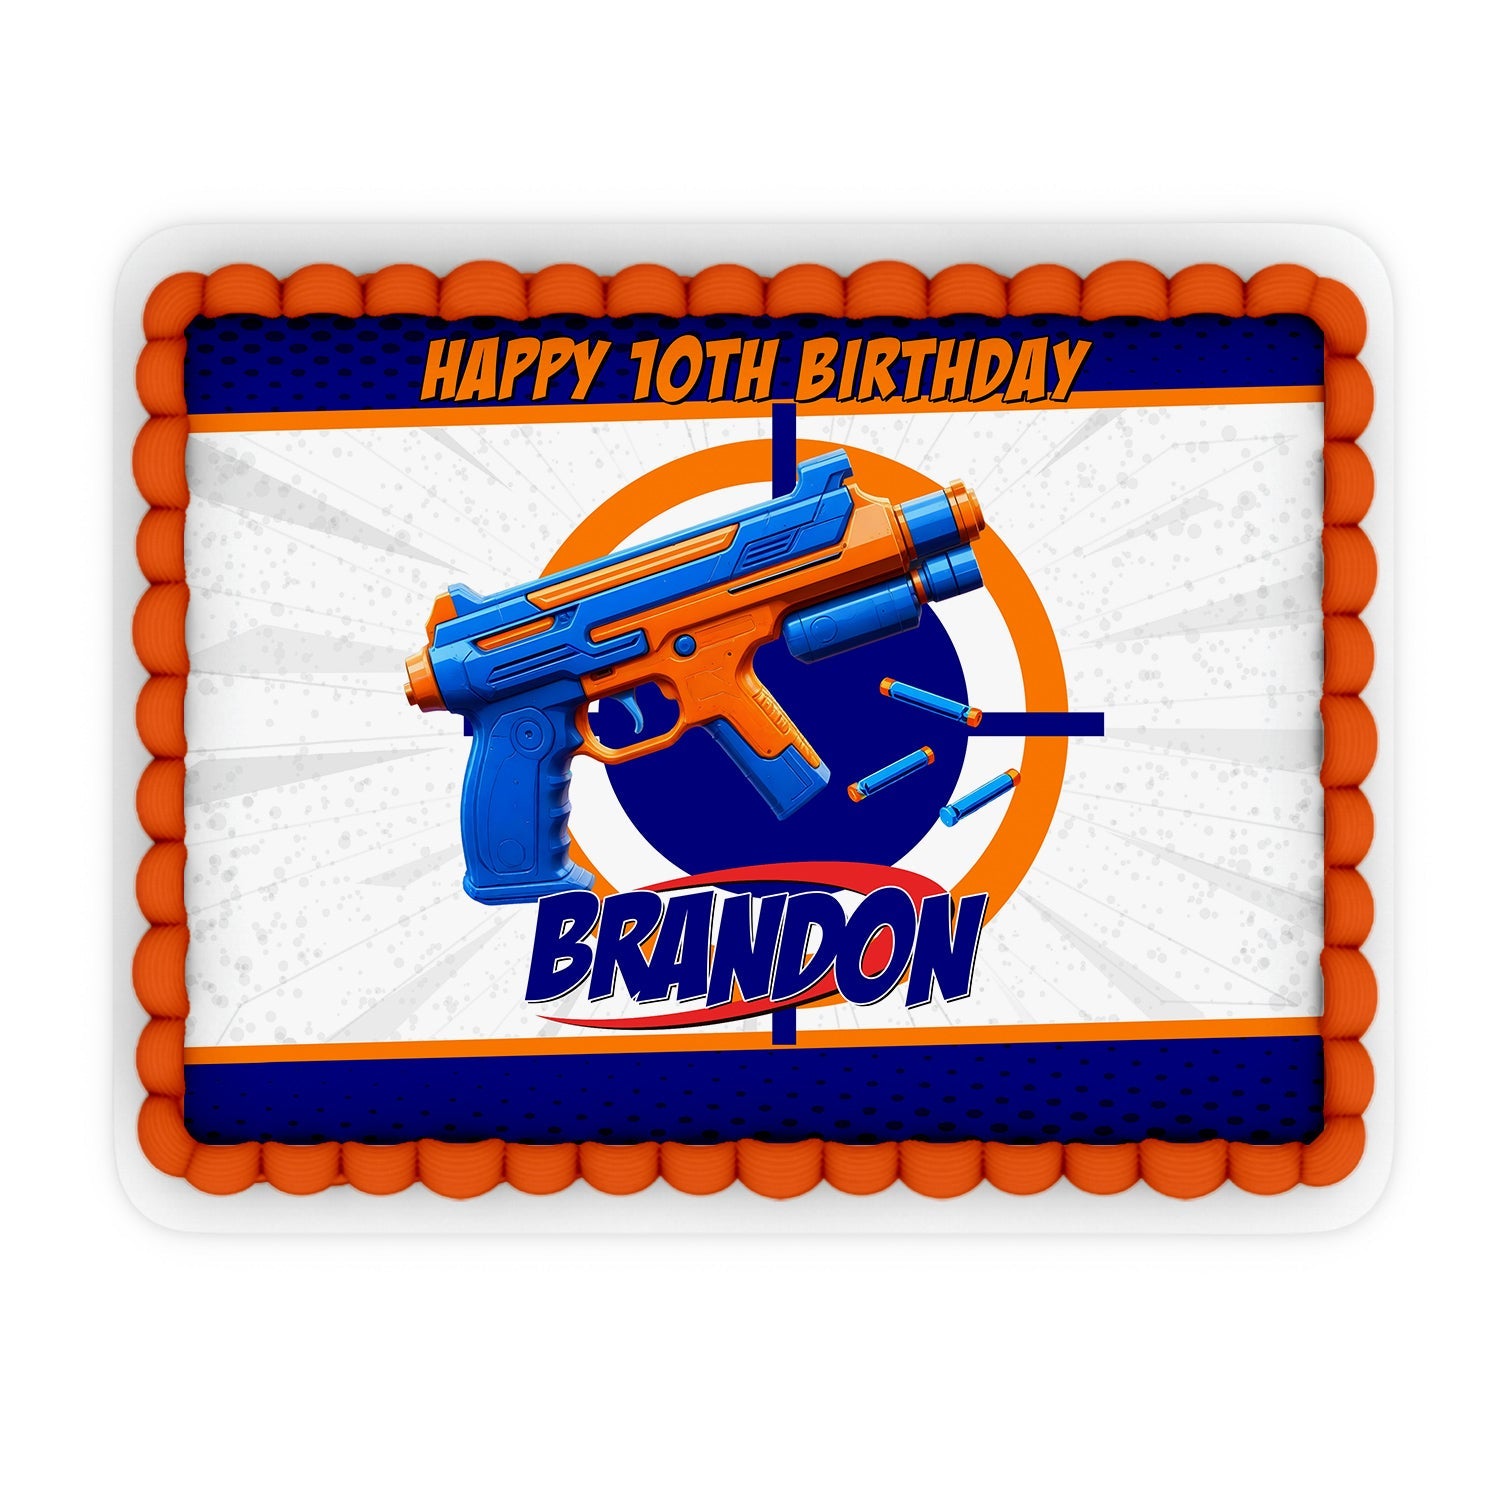 Rectangular personalized cake image, perfect for adding a Nerf theme to your party.